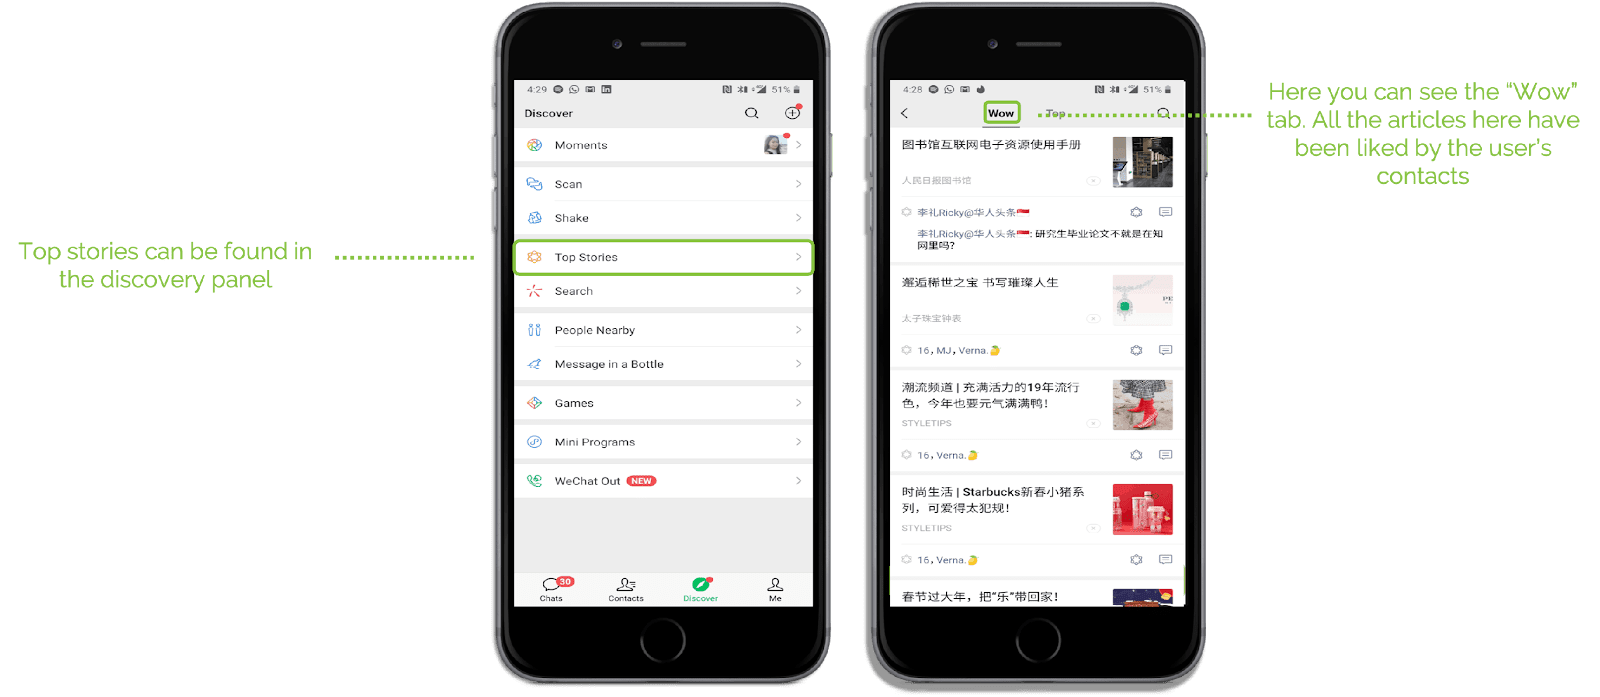 wechat wow features